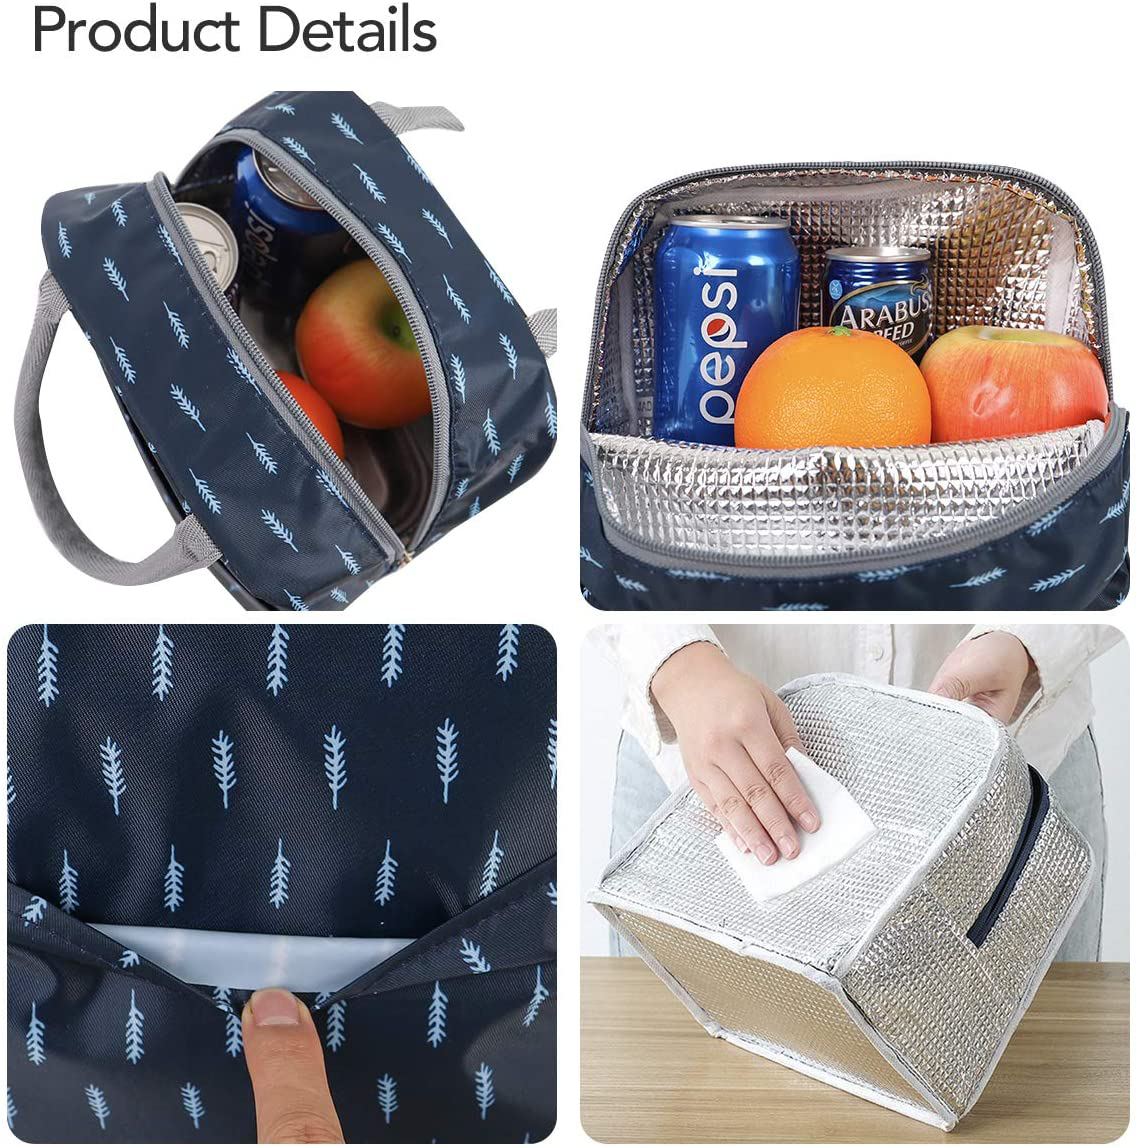 Buringer Reusable Insulated Lunch Bag Cooler Tote Box with Front Pocket Zipper Closure for Woman Man Work Picnic or Travel(Grey Ripple with Shoulder)